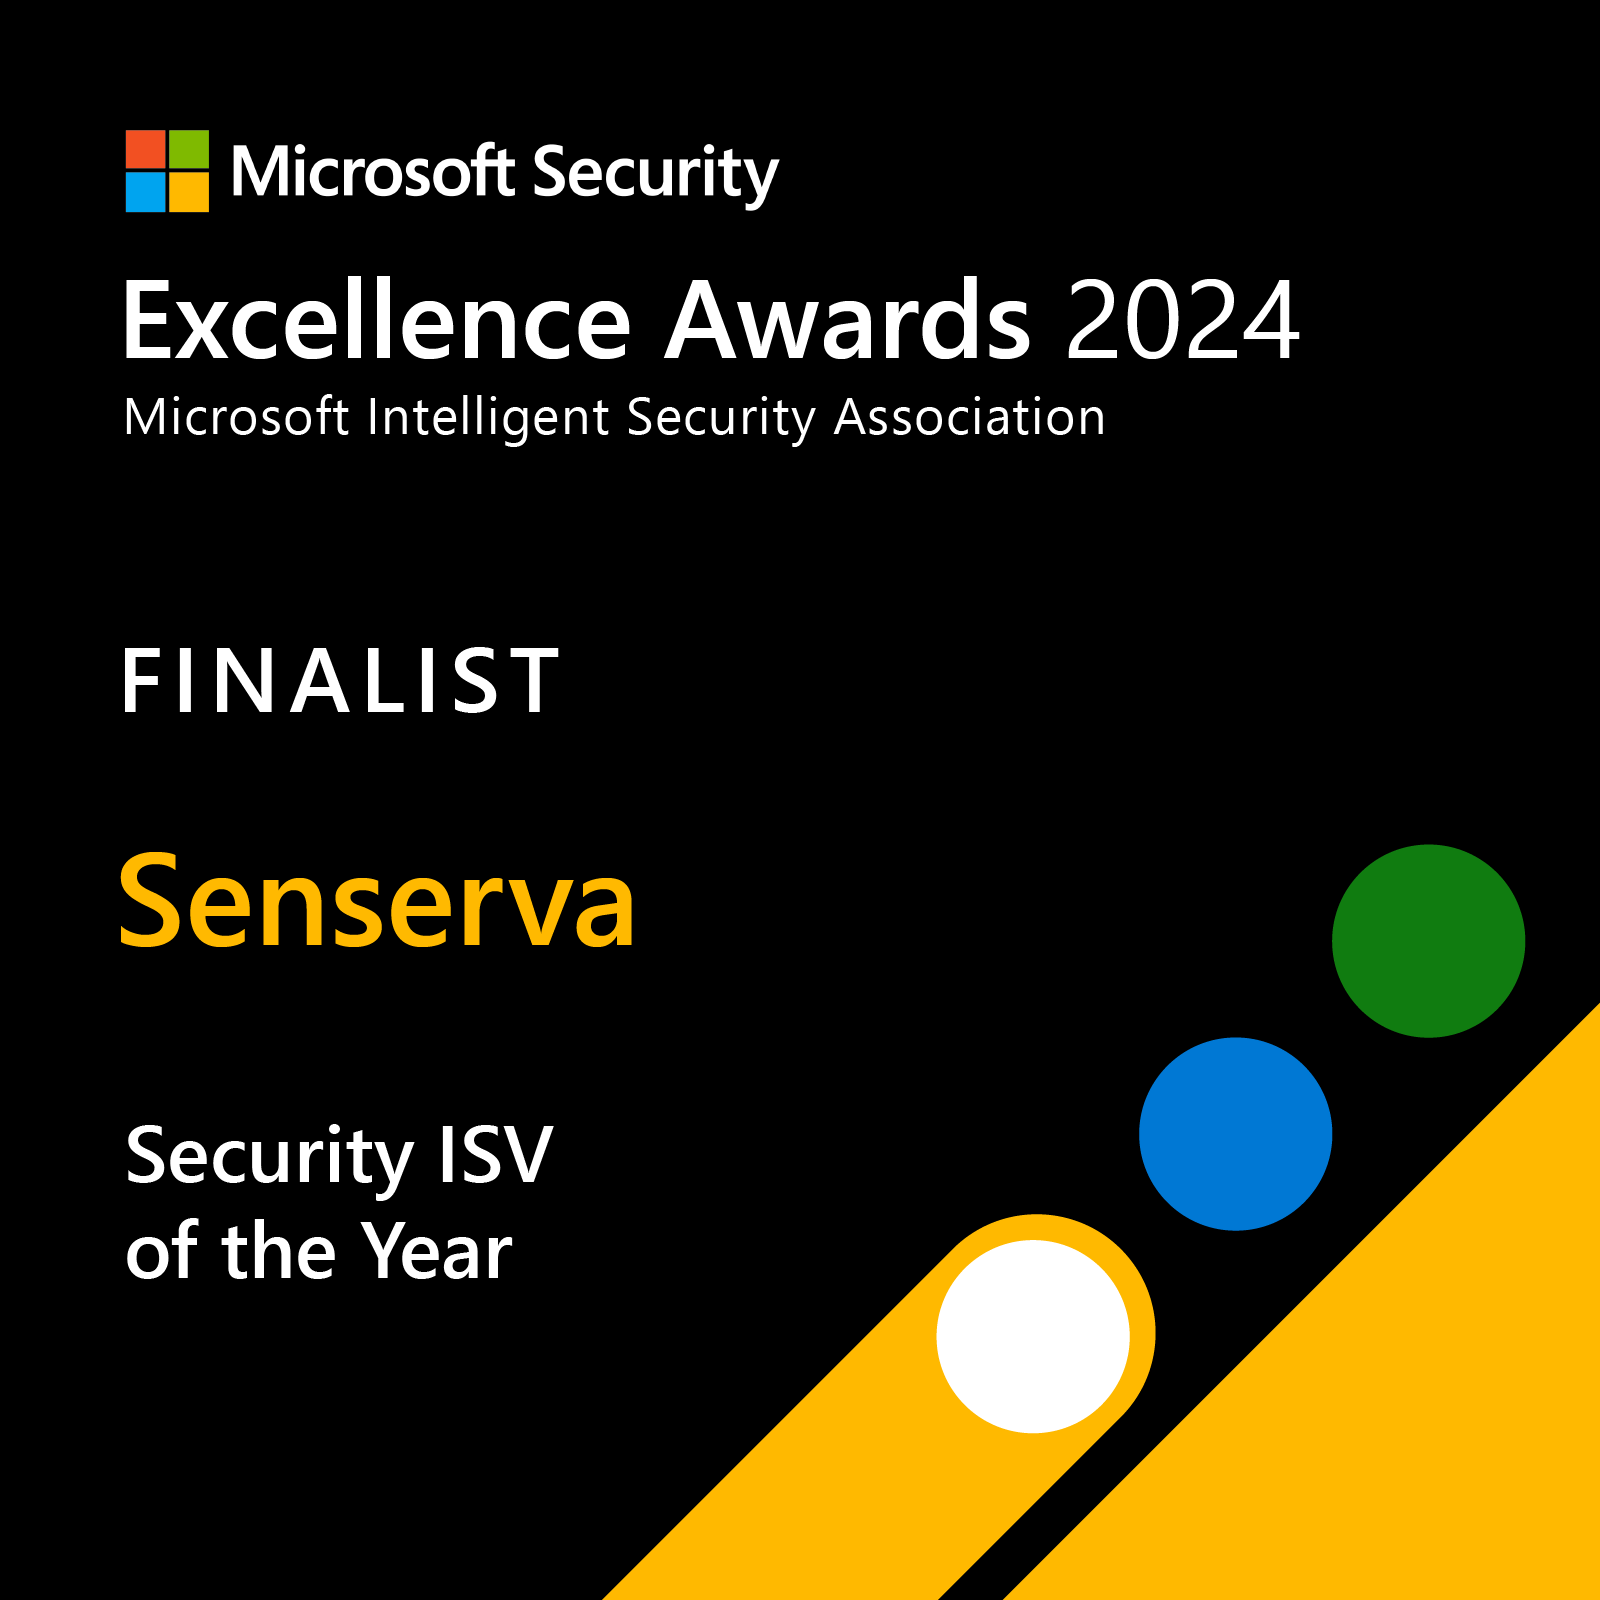 Visit with Senserva and Bulletproof executives at the Microsoft RSAC booth #6044N on May 7th from 5pm to 6pm to